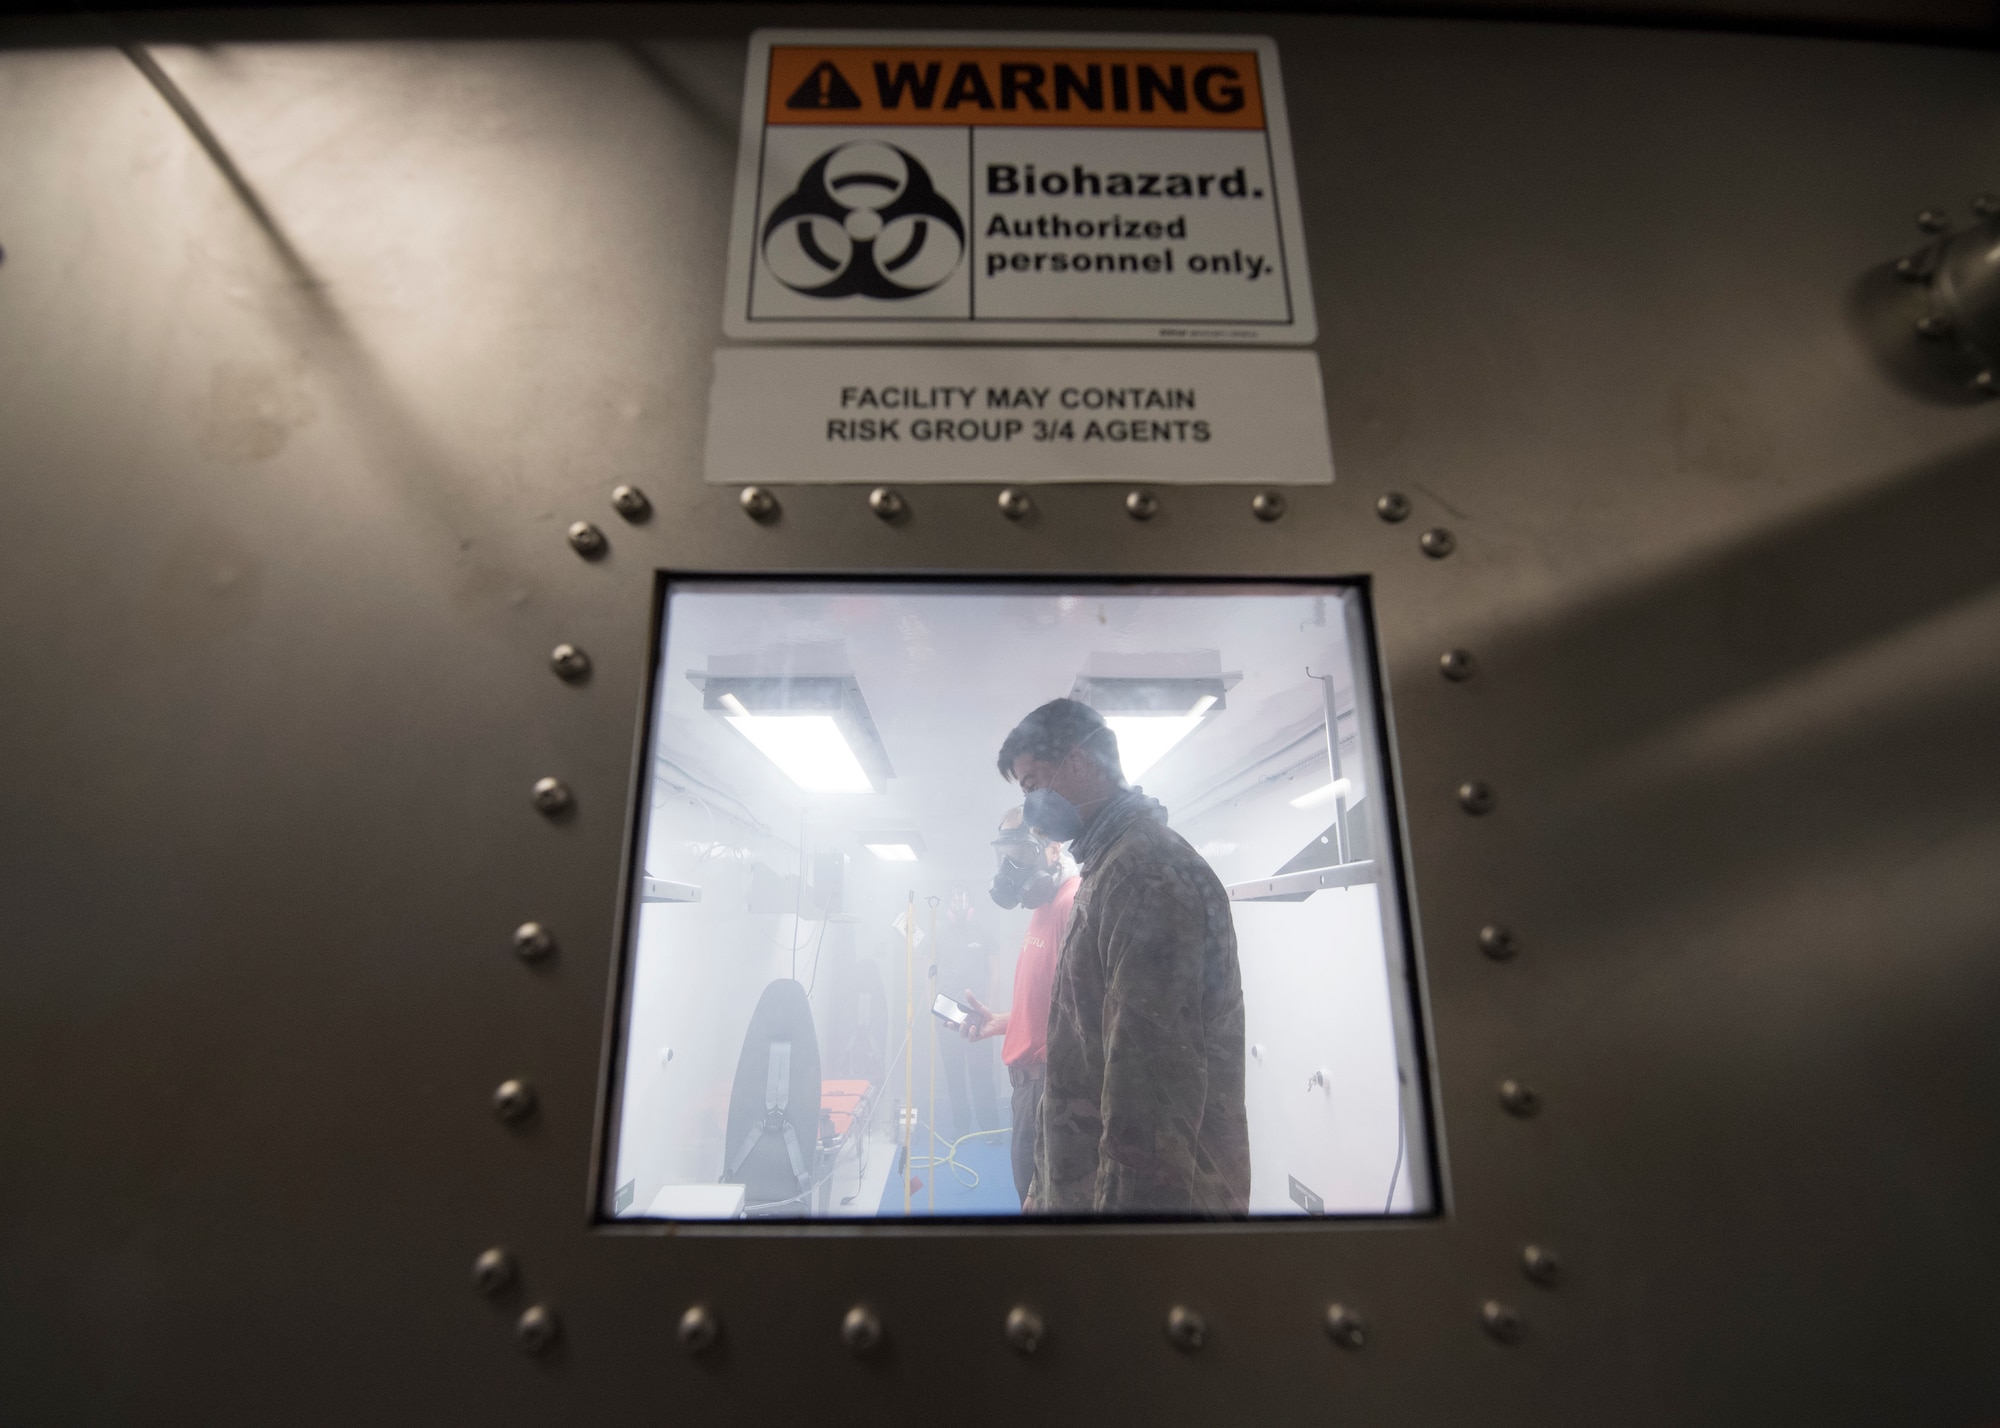 U.S. Air Force Capt. Conor Favo, 28th Test and Evaluation Squadron division chief, and Neal Riemer, contracted senior systems engineer, conduct a trial movement and purge through a Portable Bio-Containment Module loaded onto a C-17 Globemaster III at Joint Base Charleston S.C., April 15, 2020. Members from the 28th TES and Army Public Health Center tested the PBCM, which will be exercised regularly to transport COVID patients and medical personnel, all while ensuring the aircrew is impervious to risk of infection. (U.S. Air Force photo by Staff Sgt. Chris Drzazgowski)